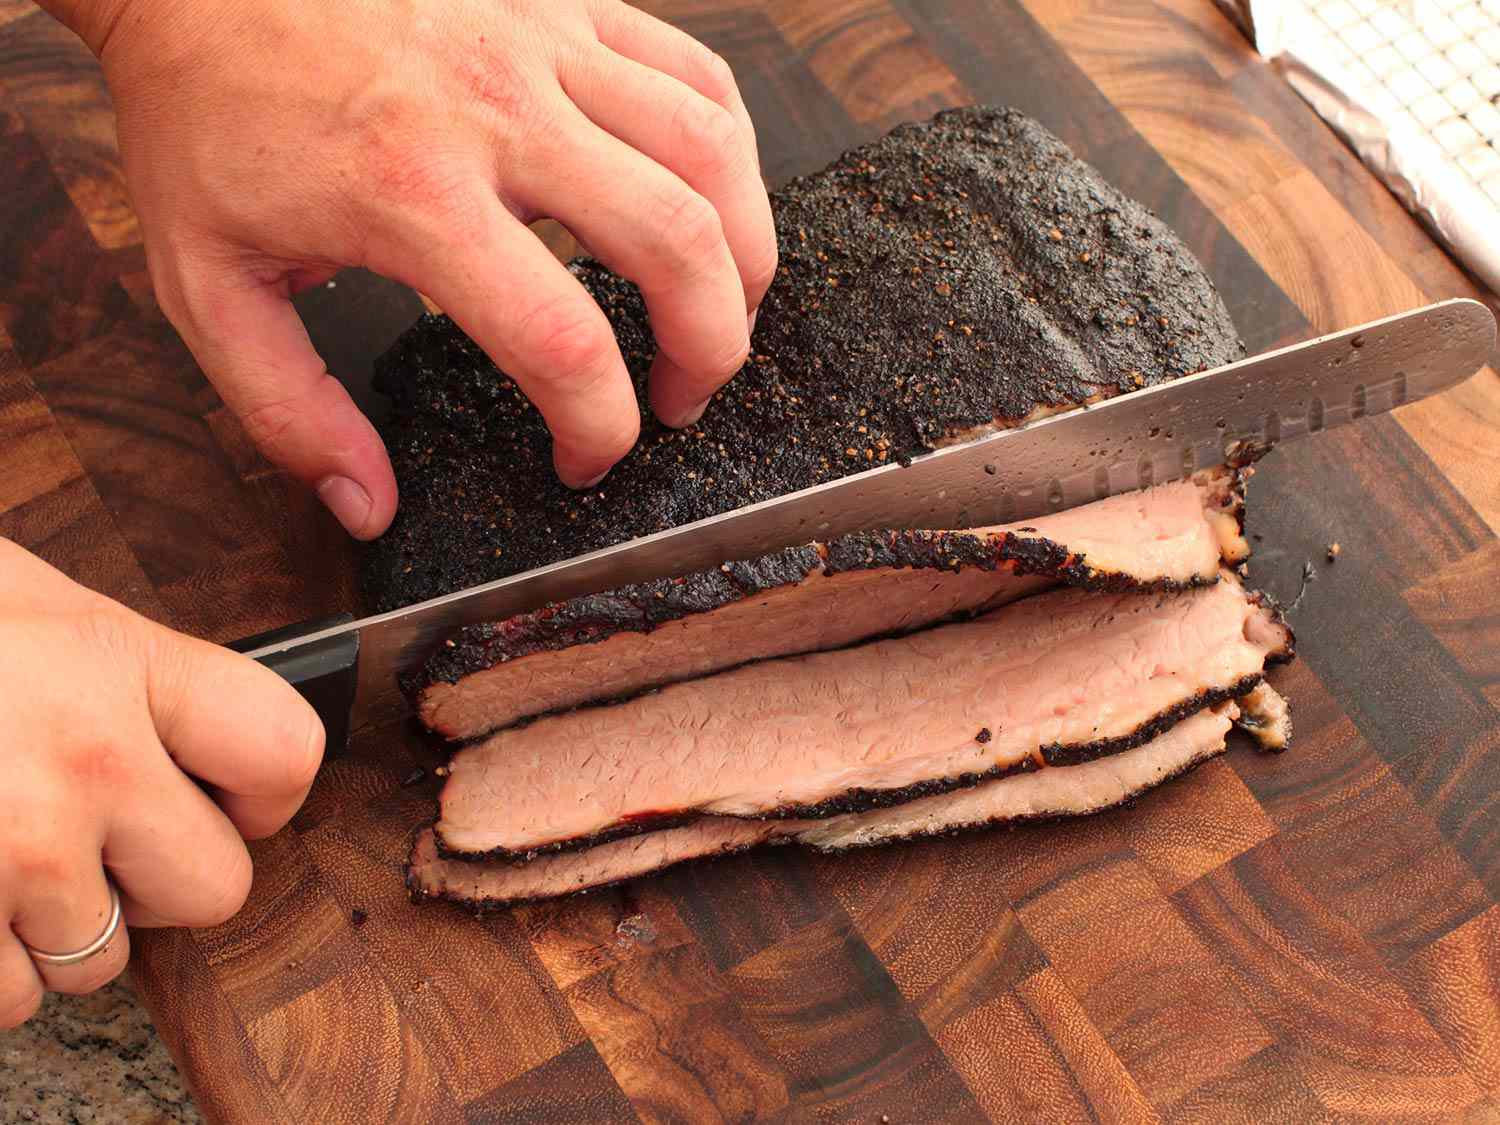 Hands cutting a finished brisket into slices on a wooden cutting board. This brisket does not have a smoke ring.